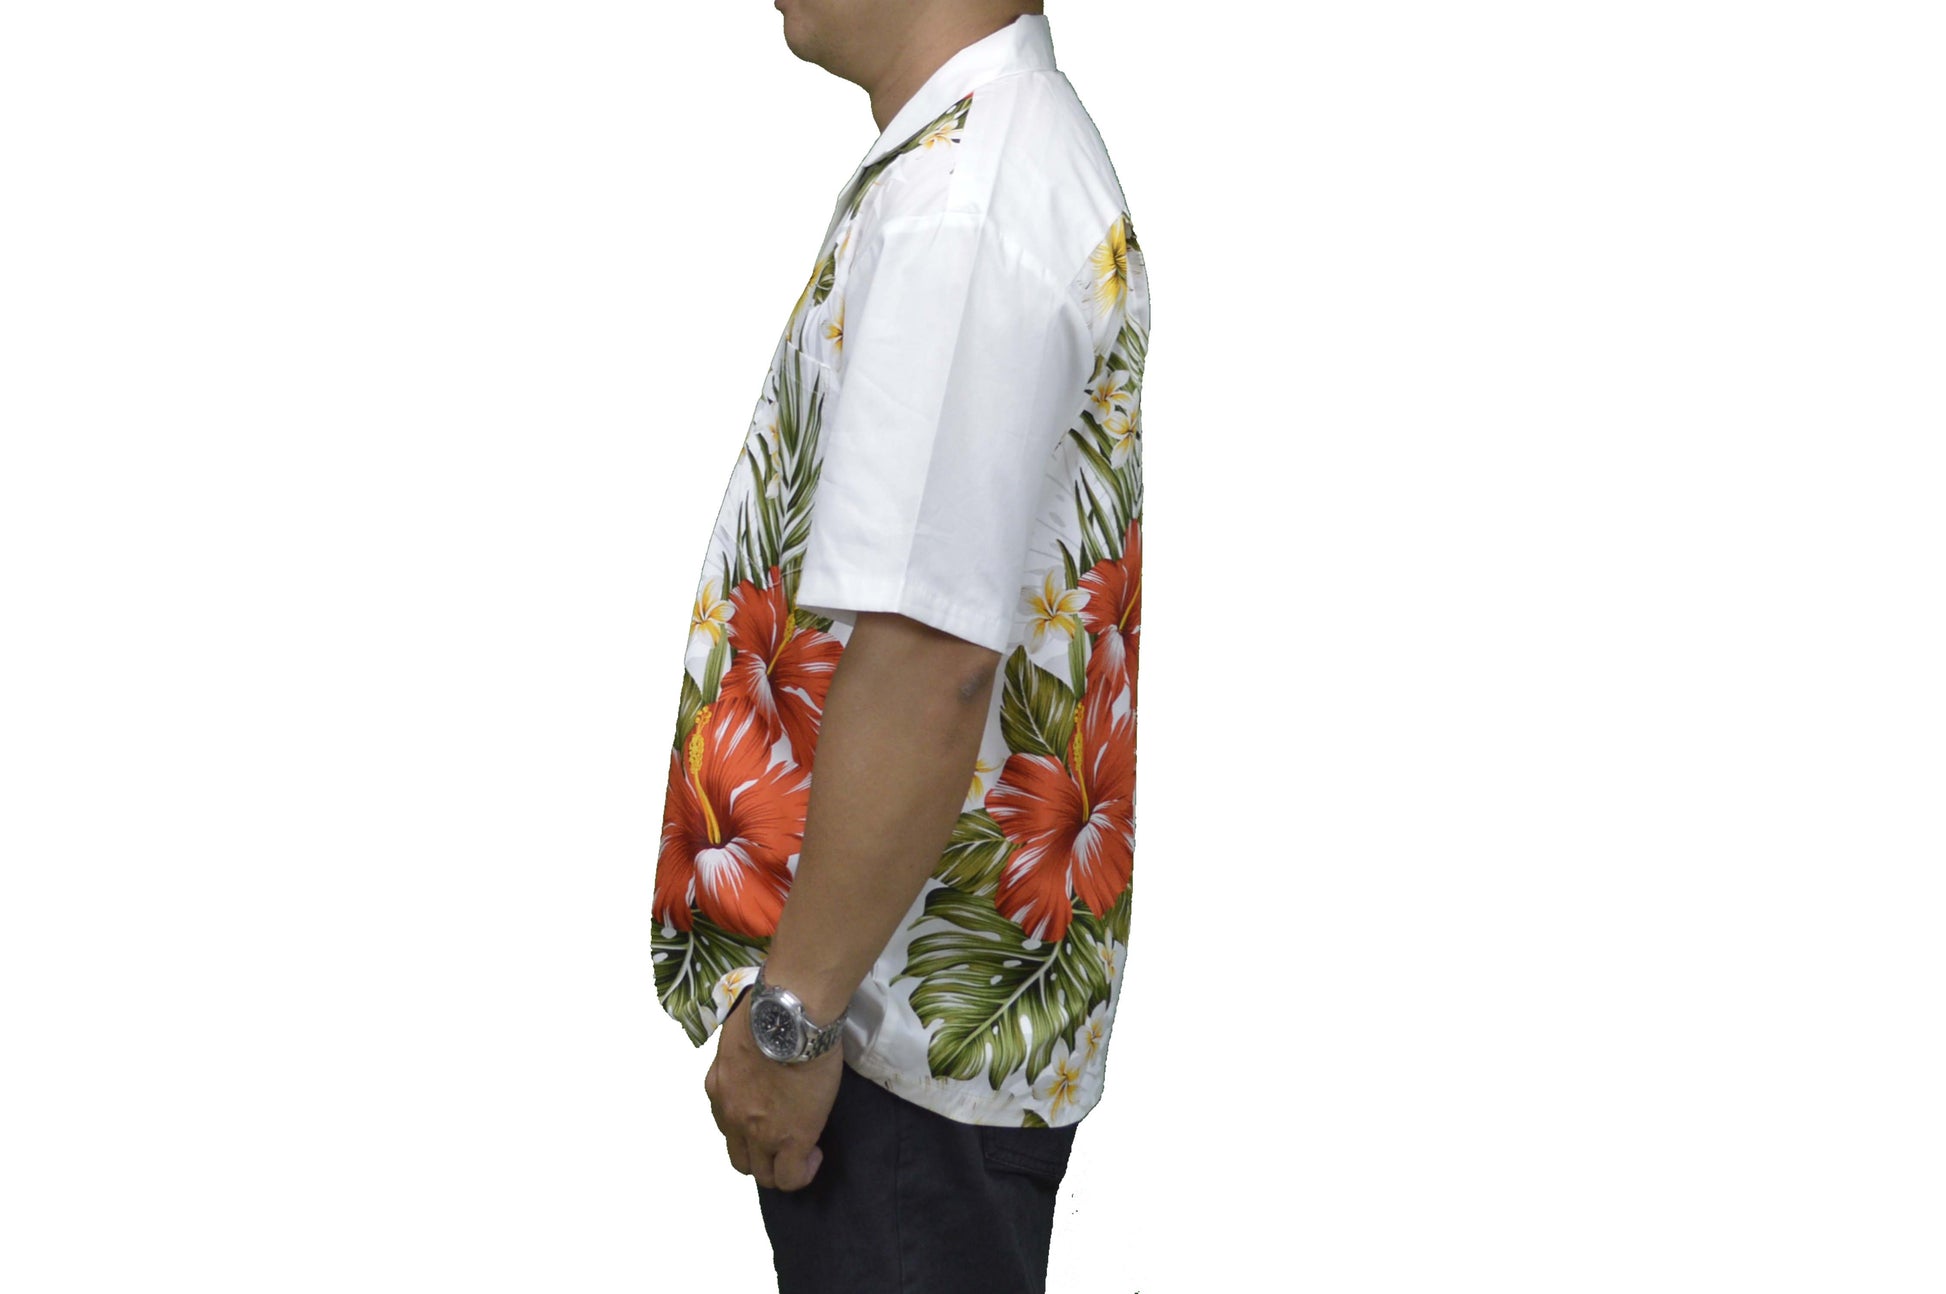 100% cotton Hawaiian shirt with red hibiscus side flower, white shirt is made locally Honolulu